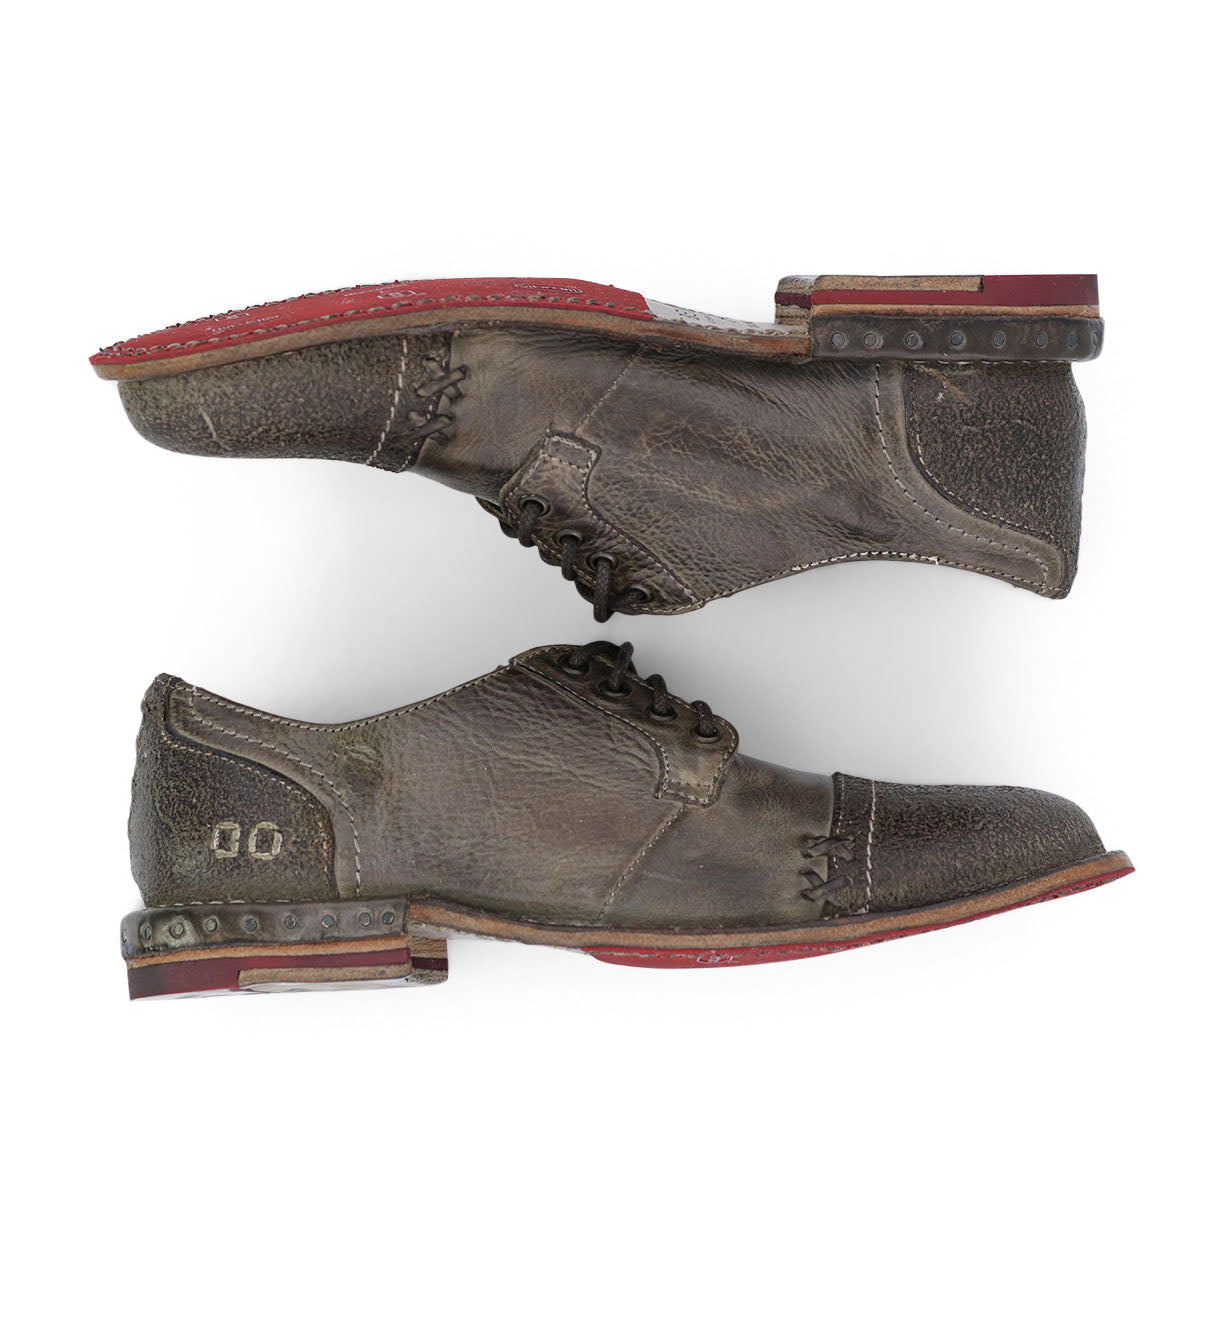 A pair of Plio brown oxford shoes with red soles by Bed Stu.